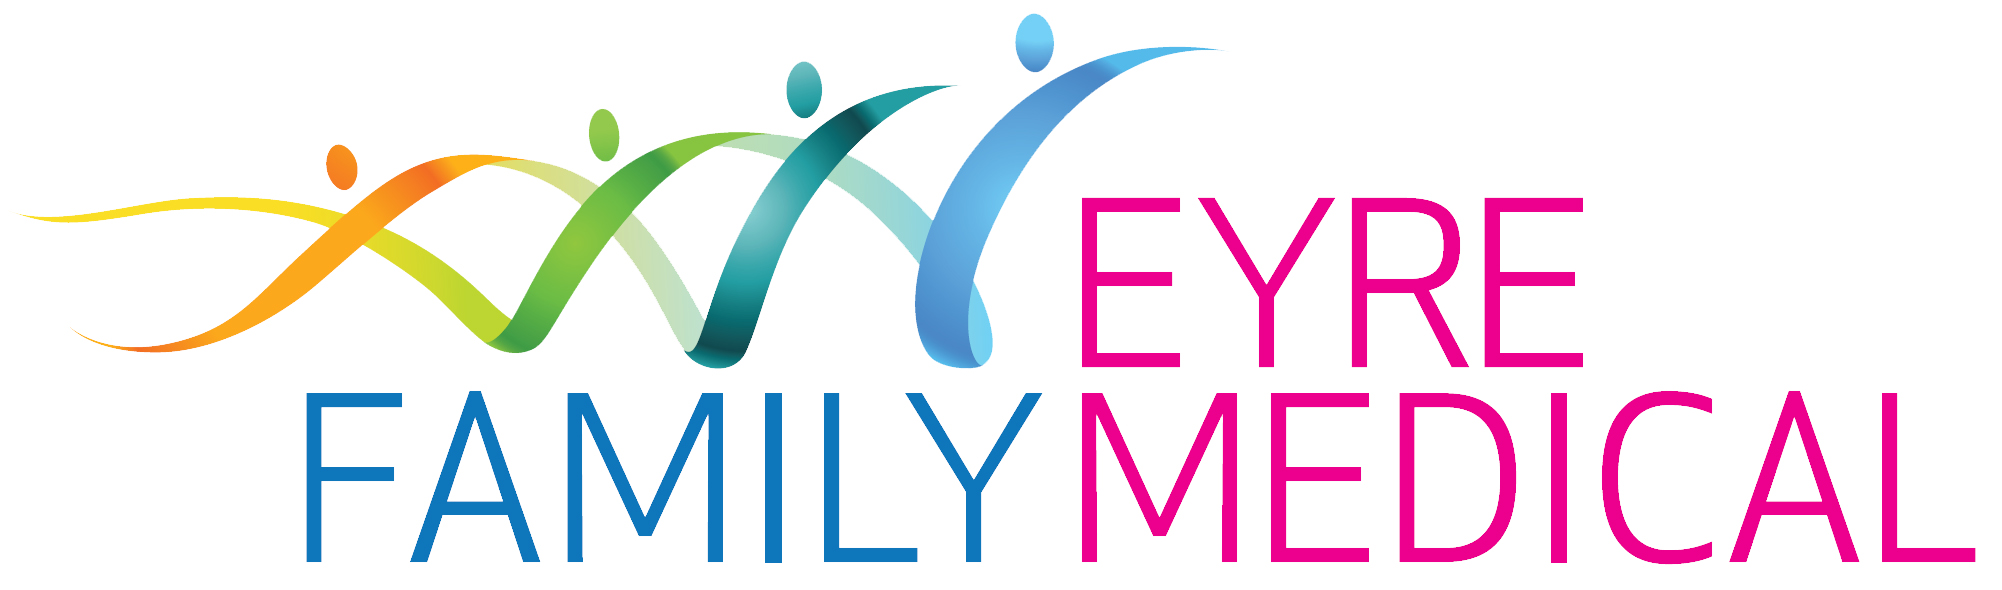 Eyre Family Medical